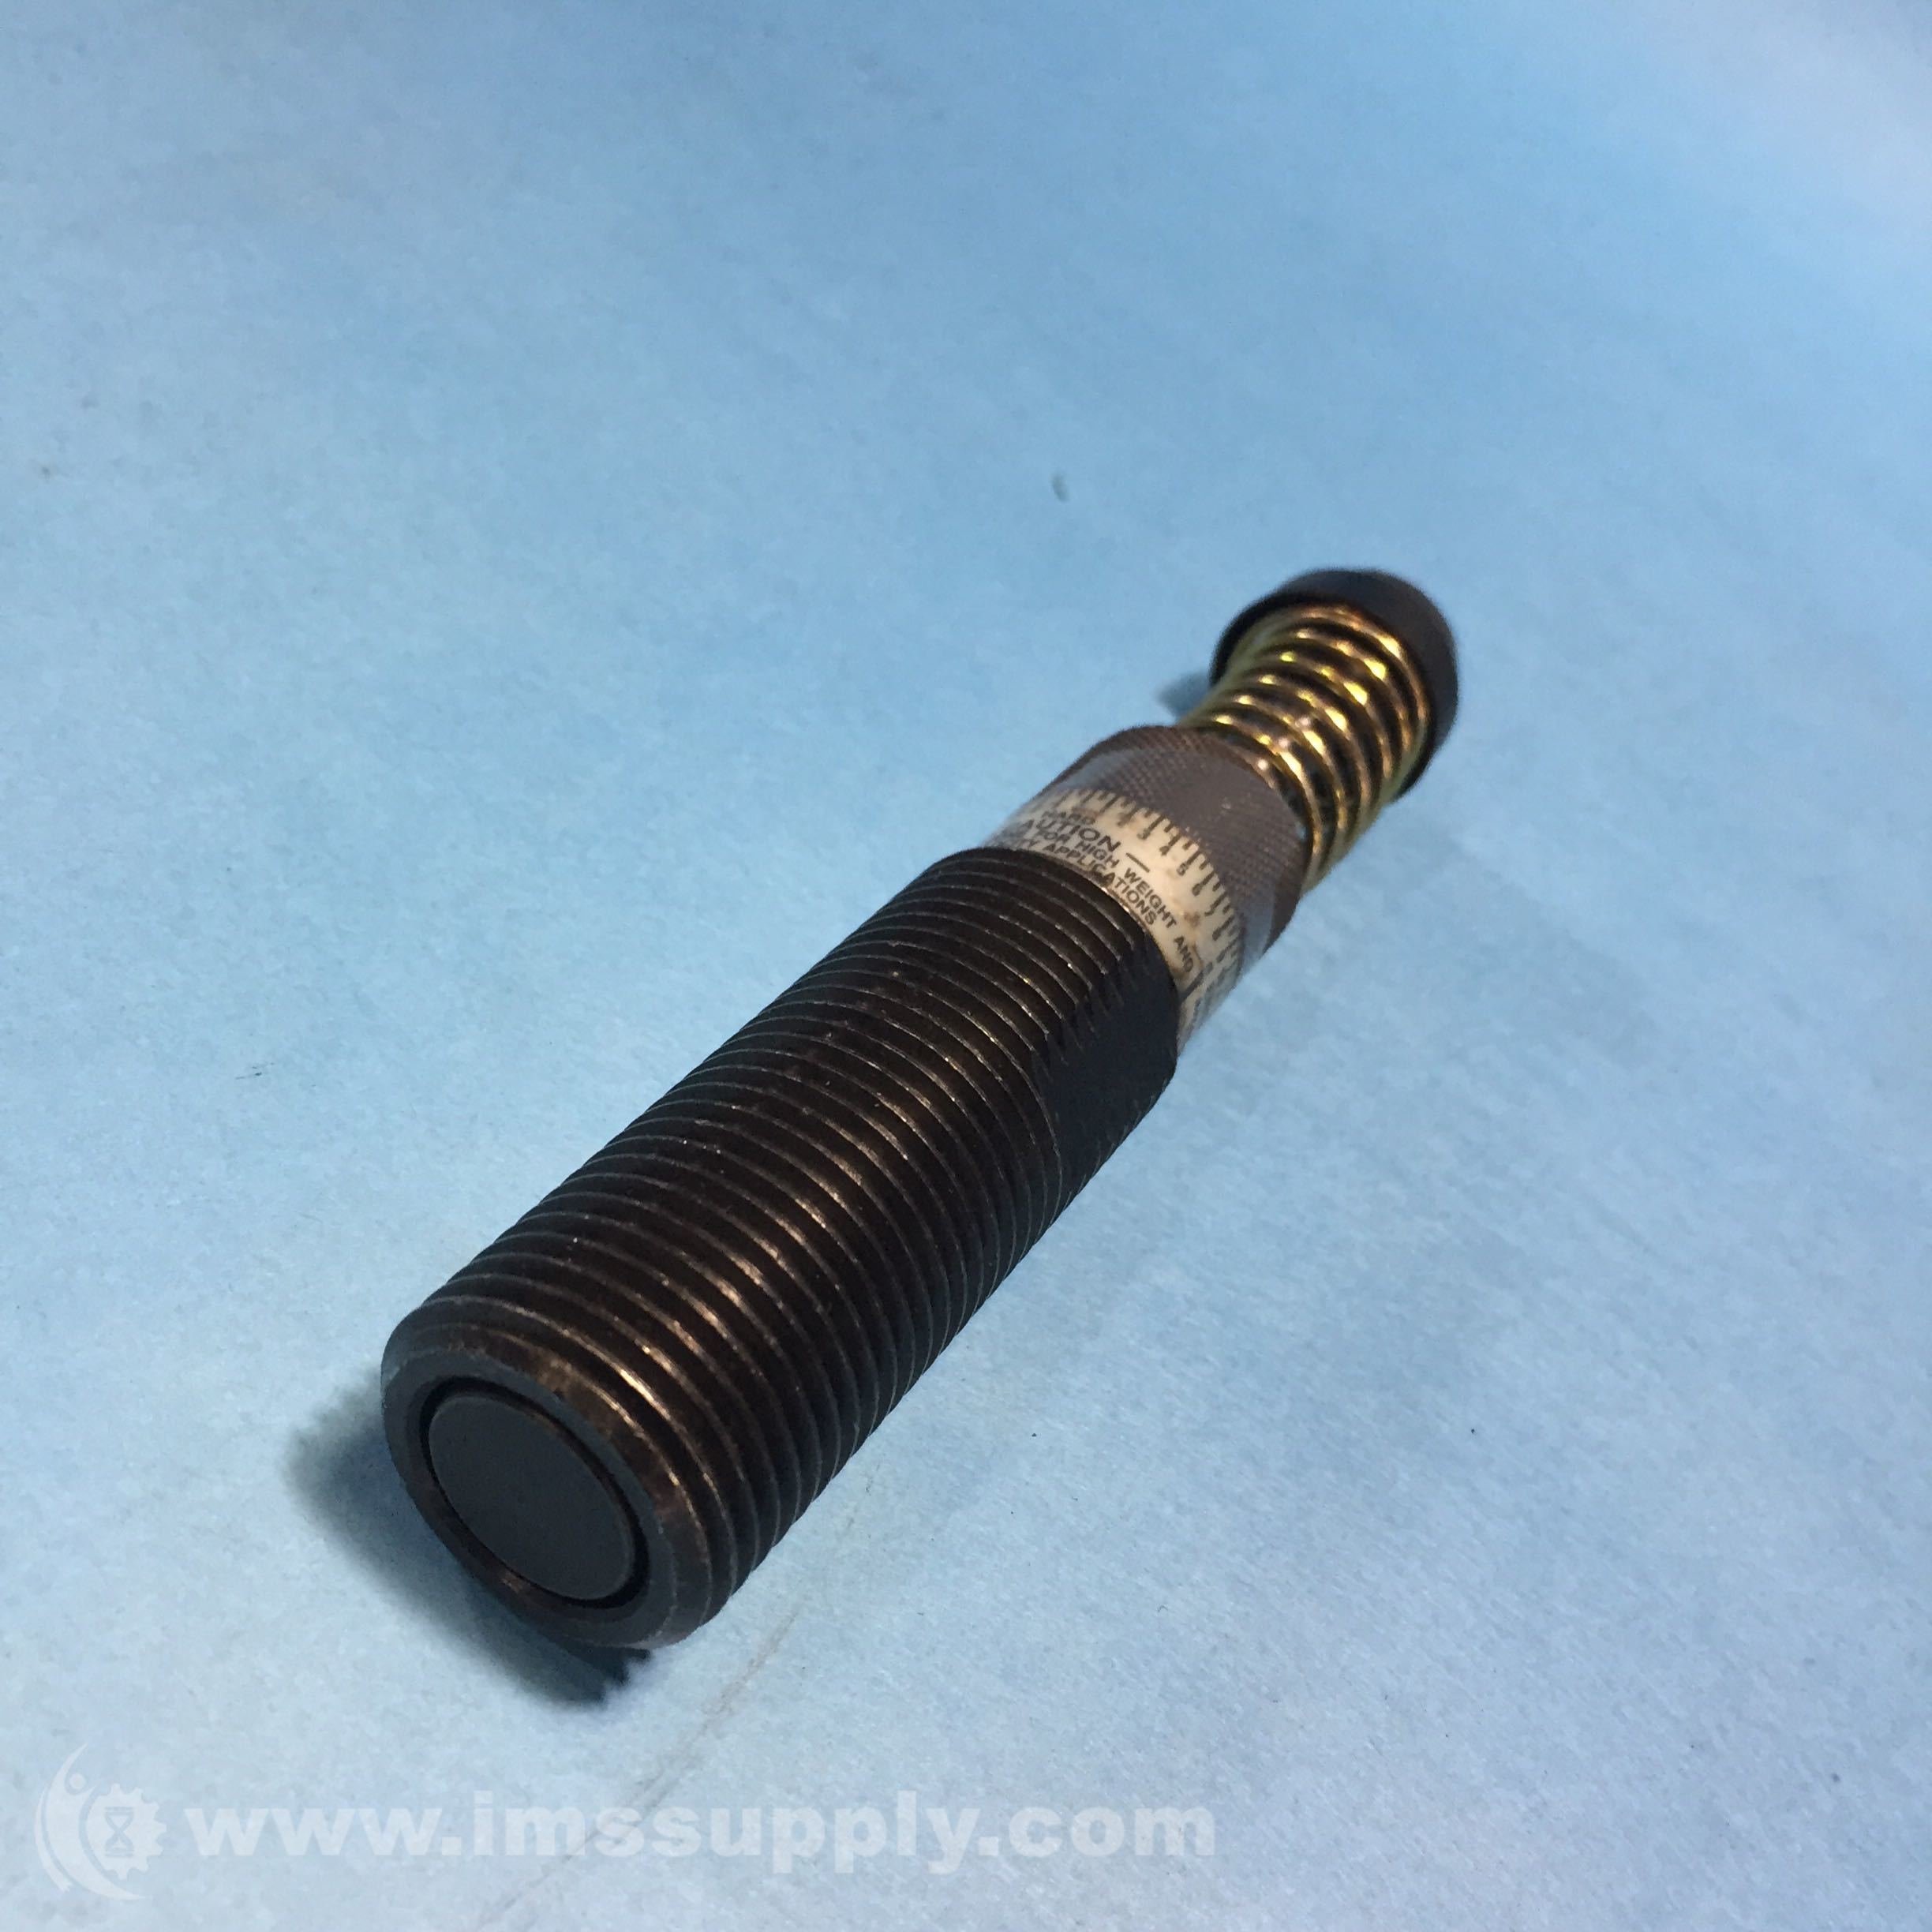 Details about   Enertrols L/D ALD3X5R8000 Hydraulic Shock Absorber USED 